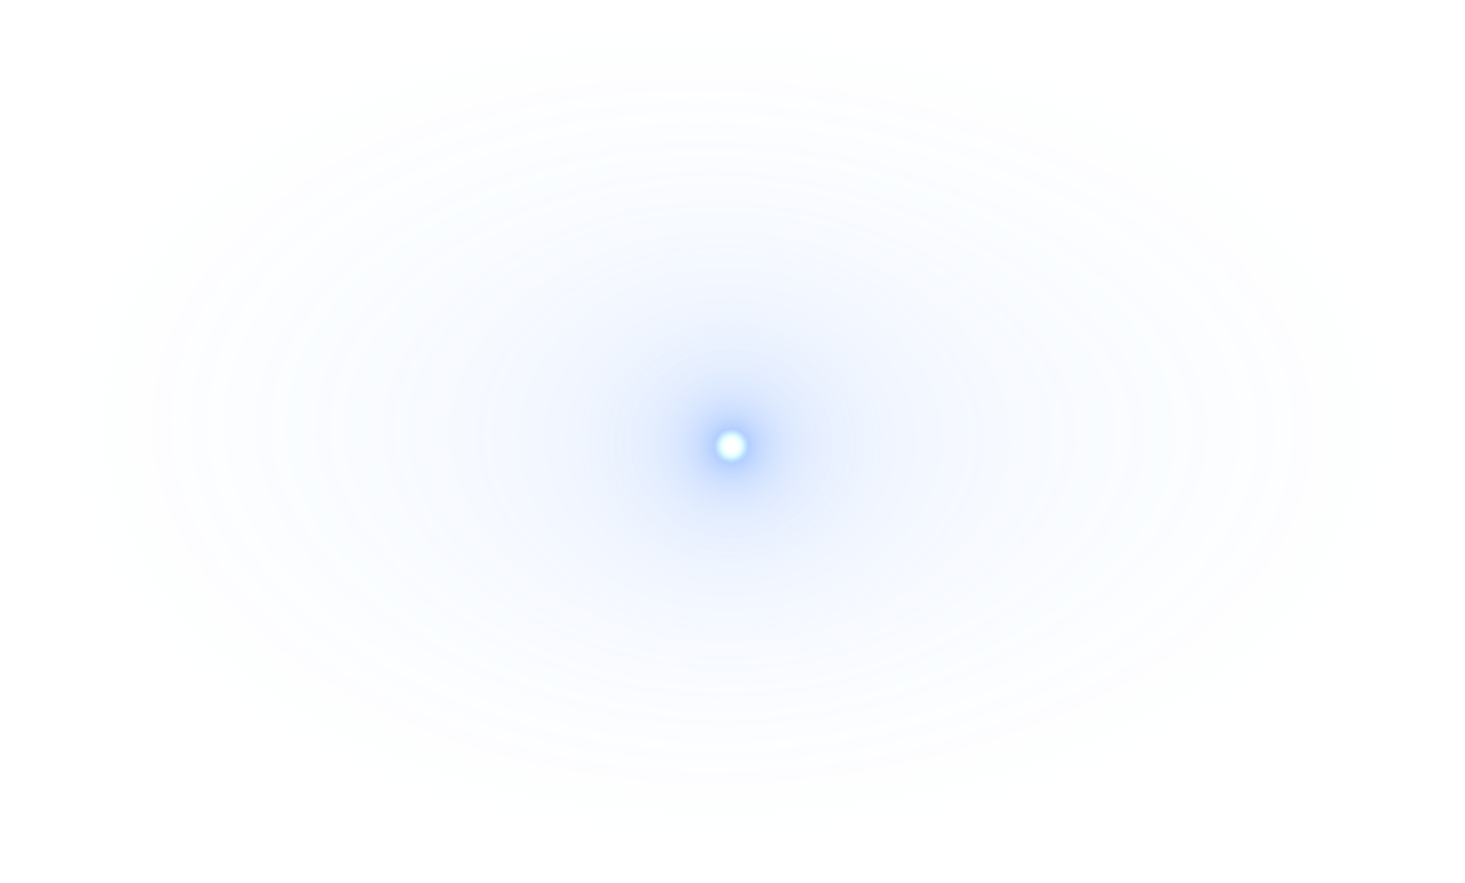 Abstract Blue Concentric Circles Background